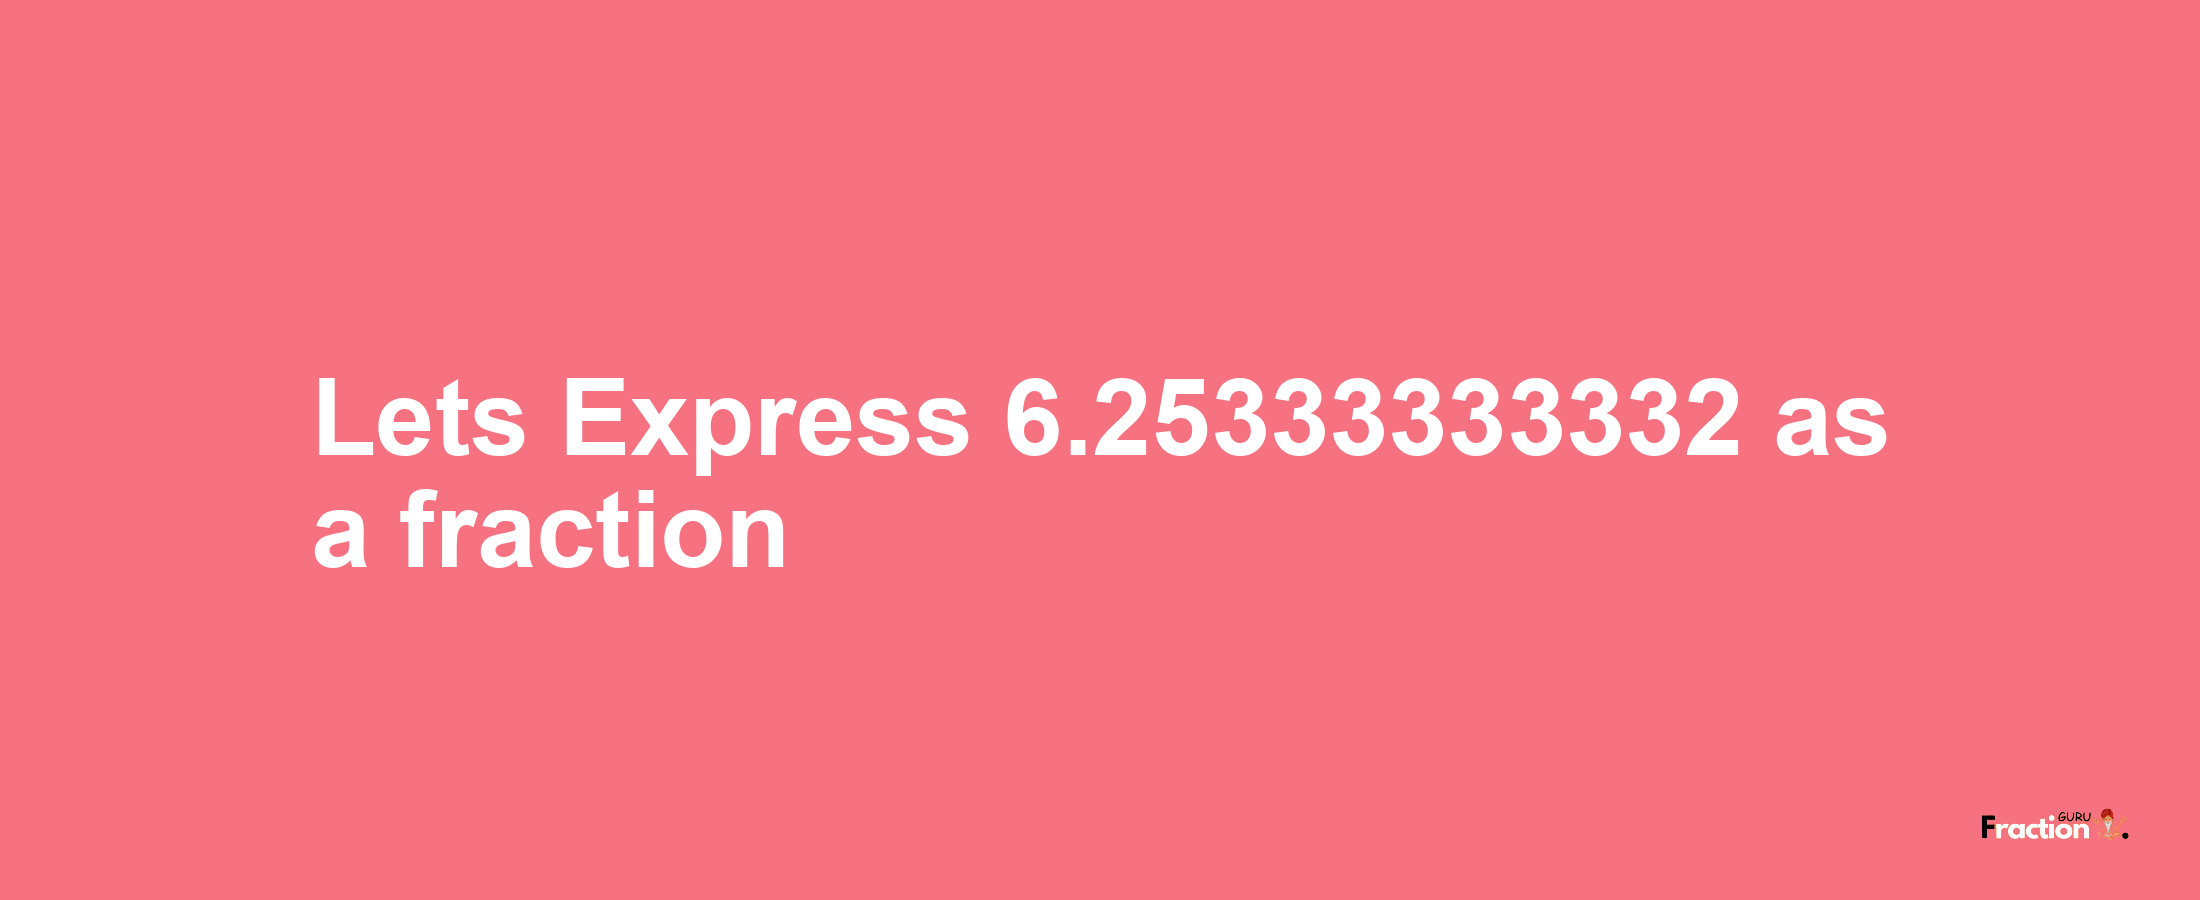 Lets Express 6.25333333332 as afraction